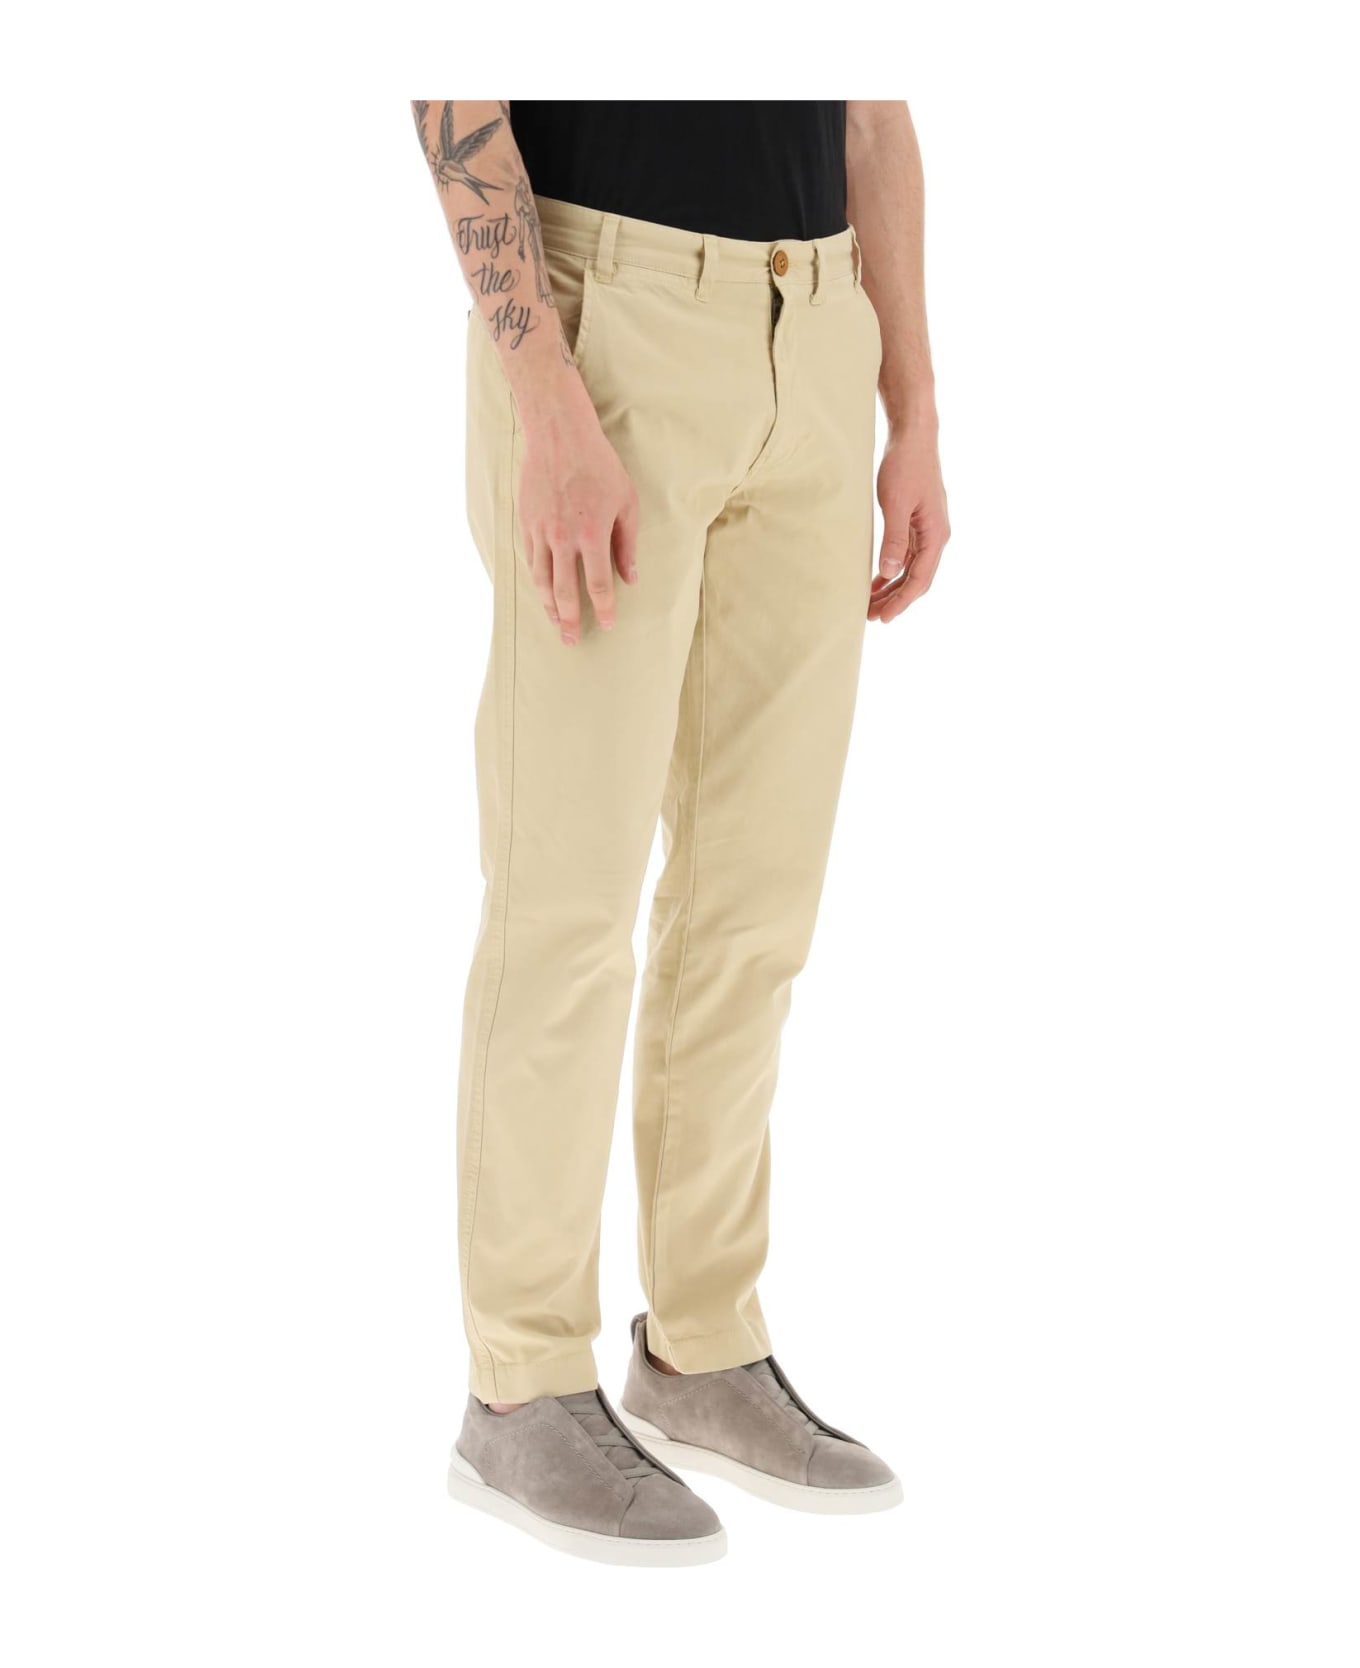 Barbour 'glendale' Chino Pants - STONE (Beige)